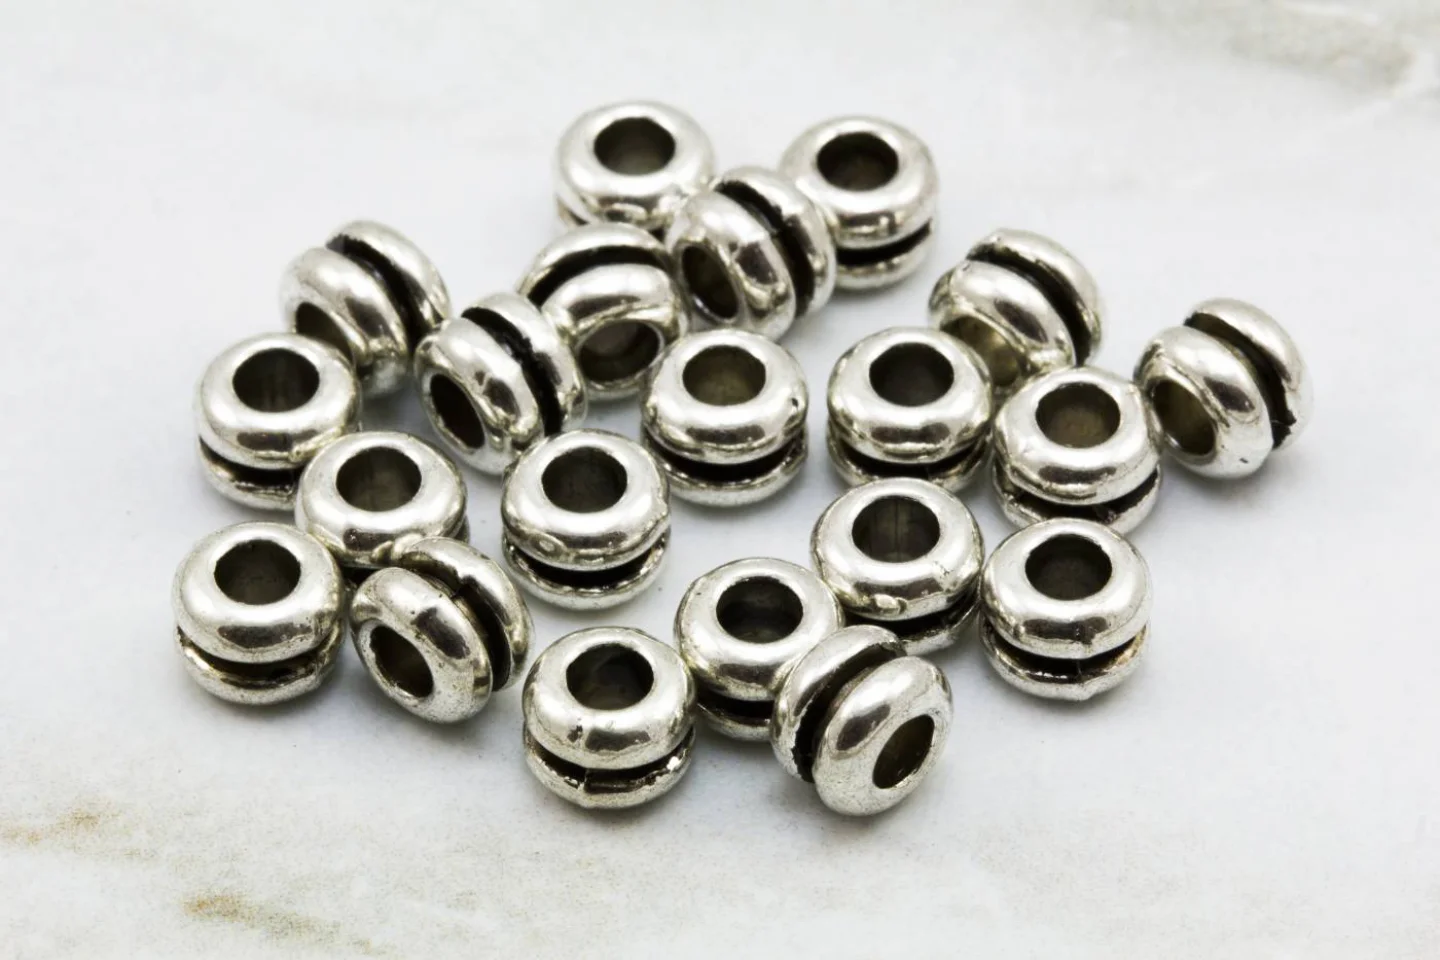 metal-silver-round-jewelry-spacer-beads.